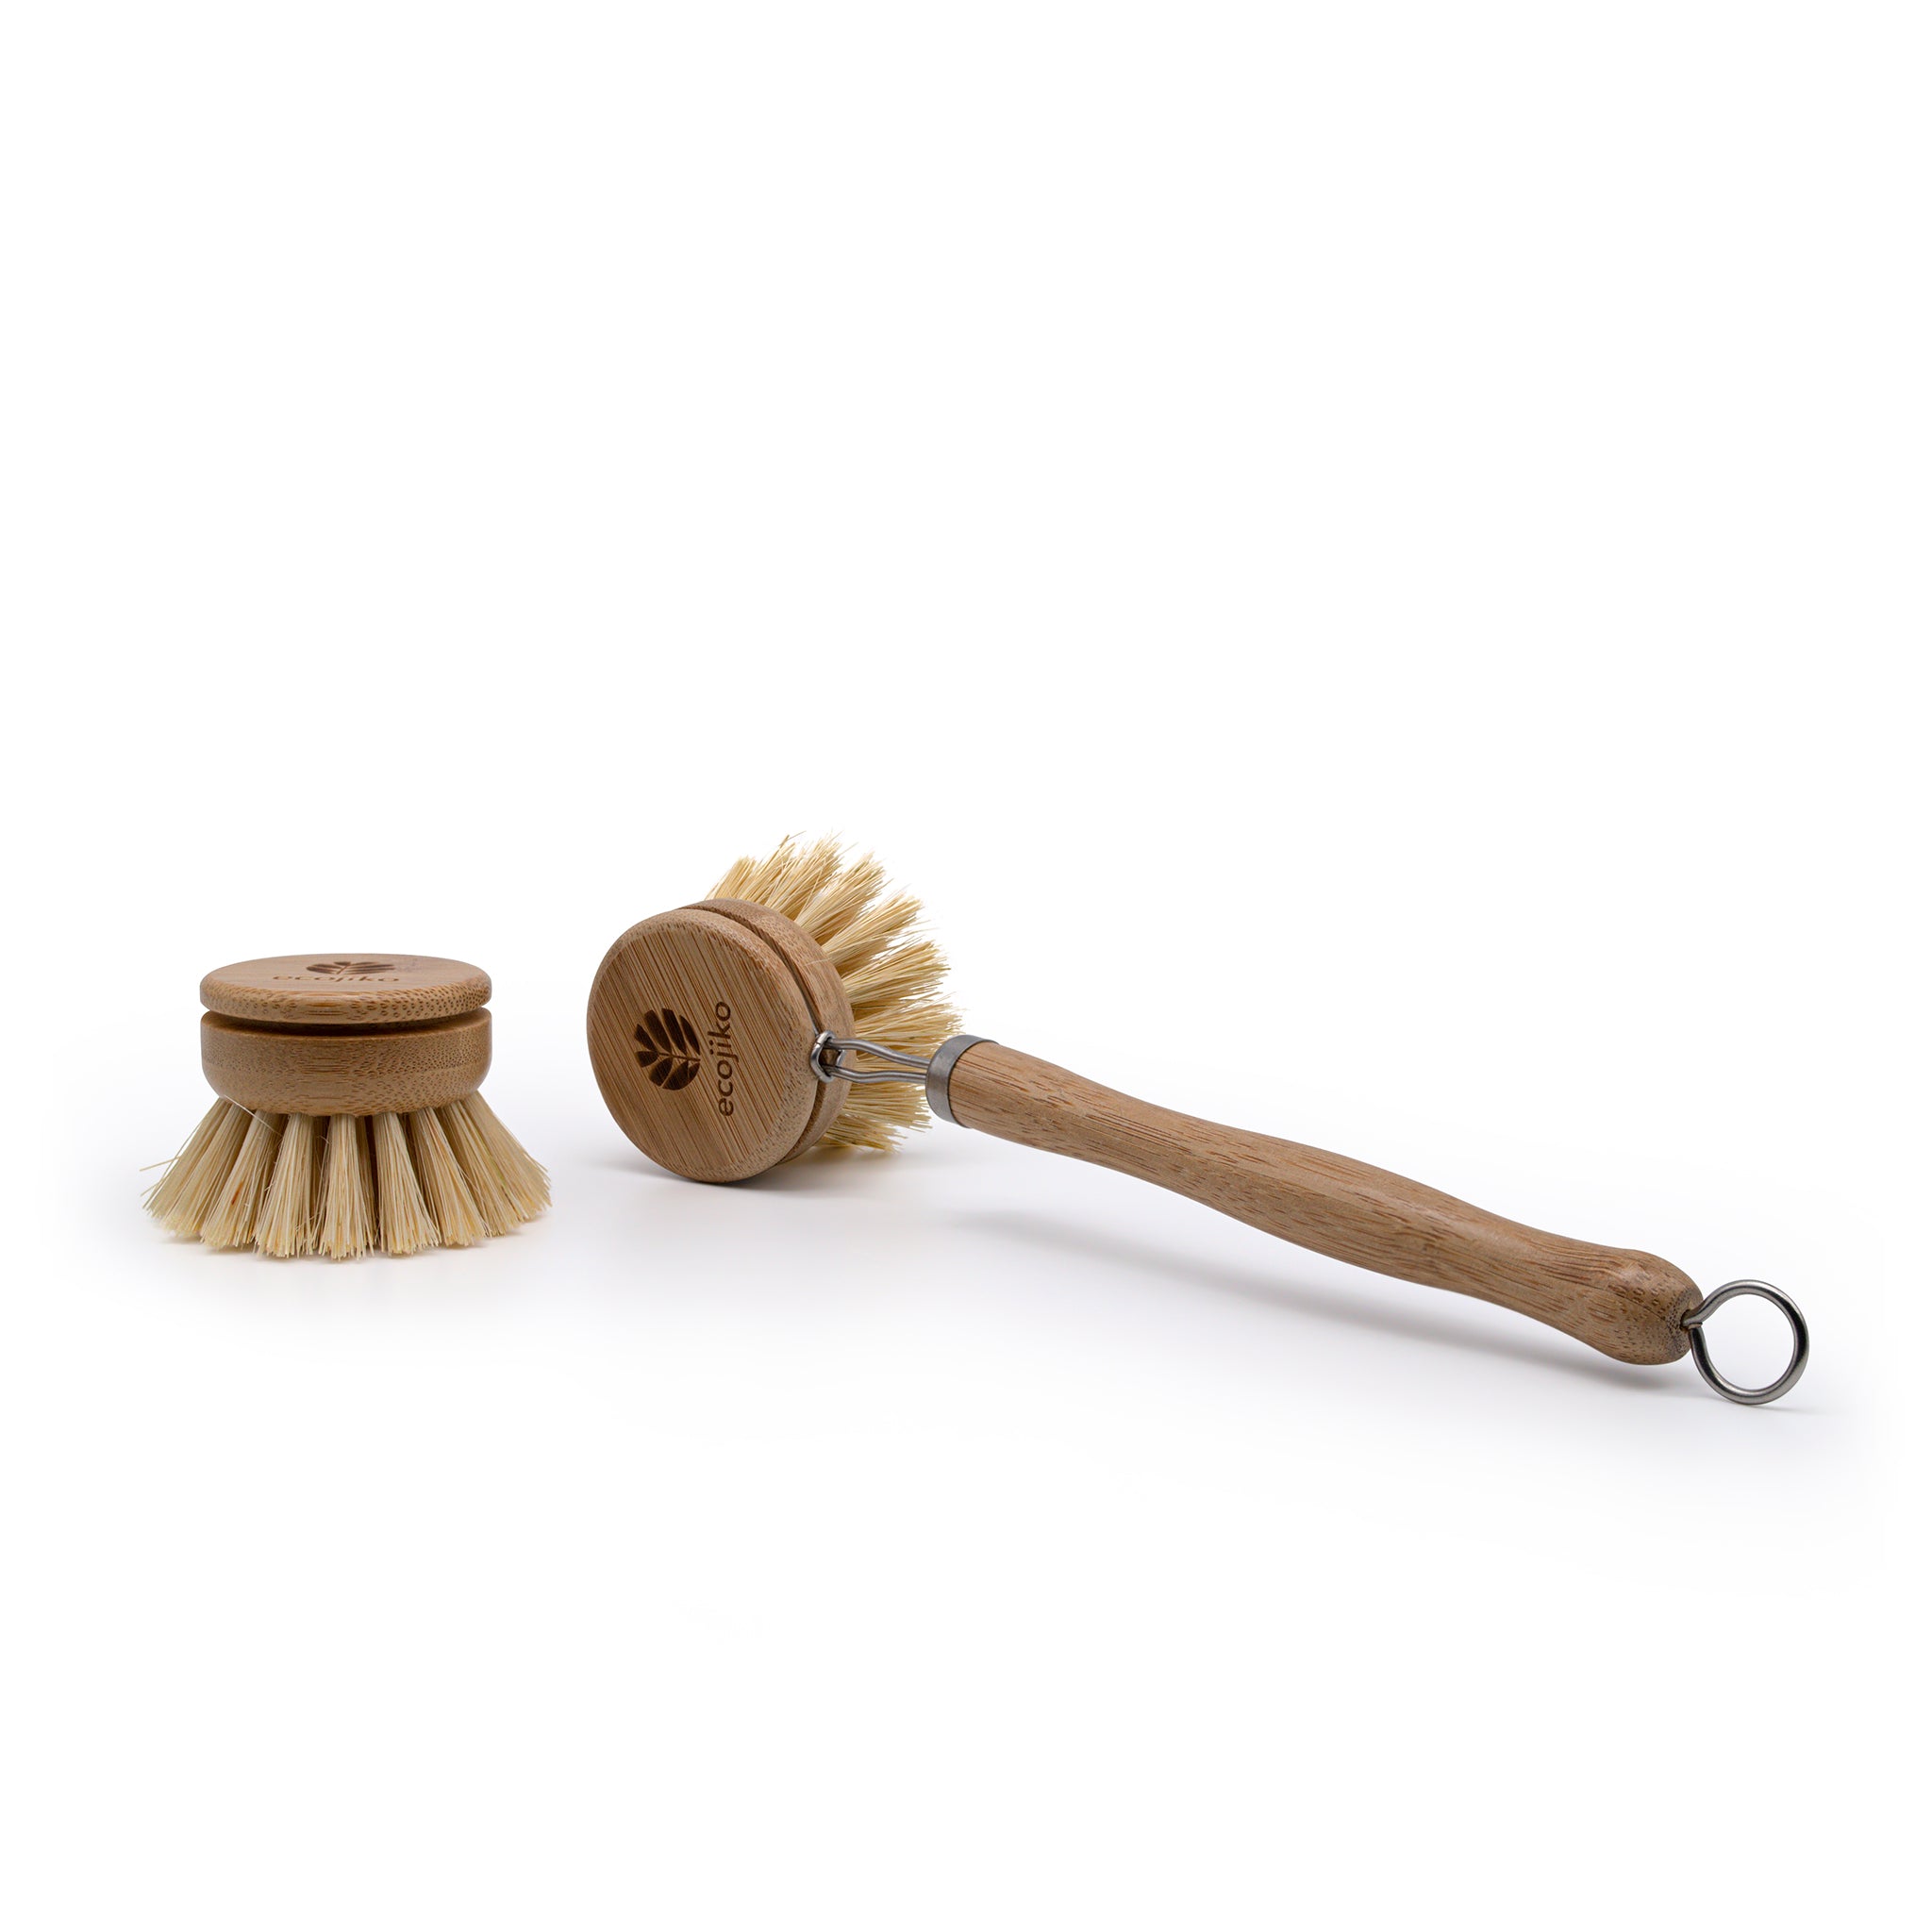 Bamboo dish brush lying next to one of the replacement bamboo and sisal heads